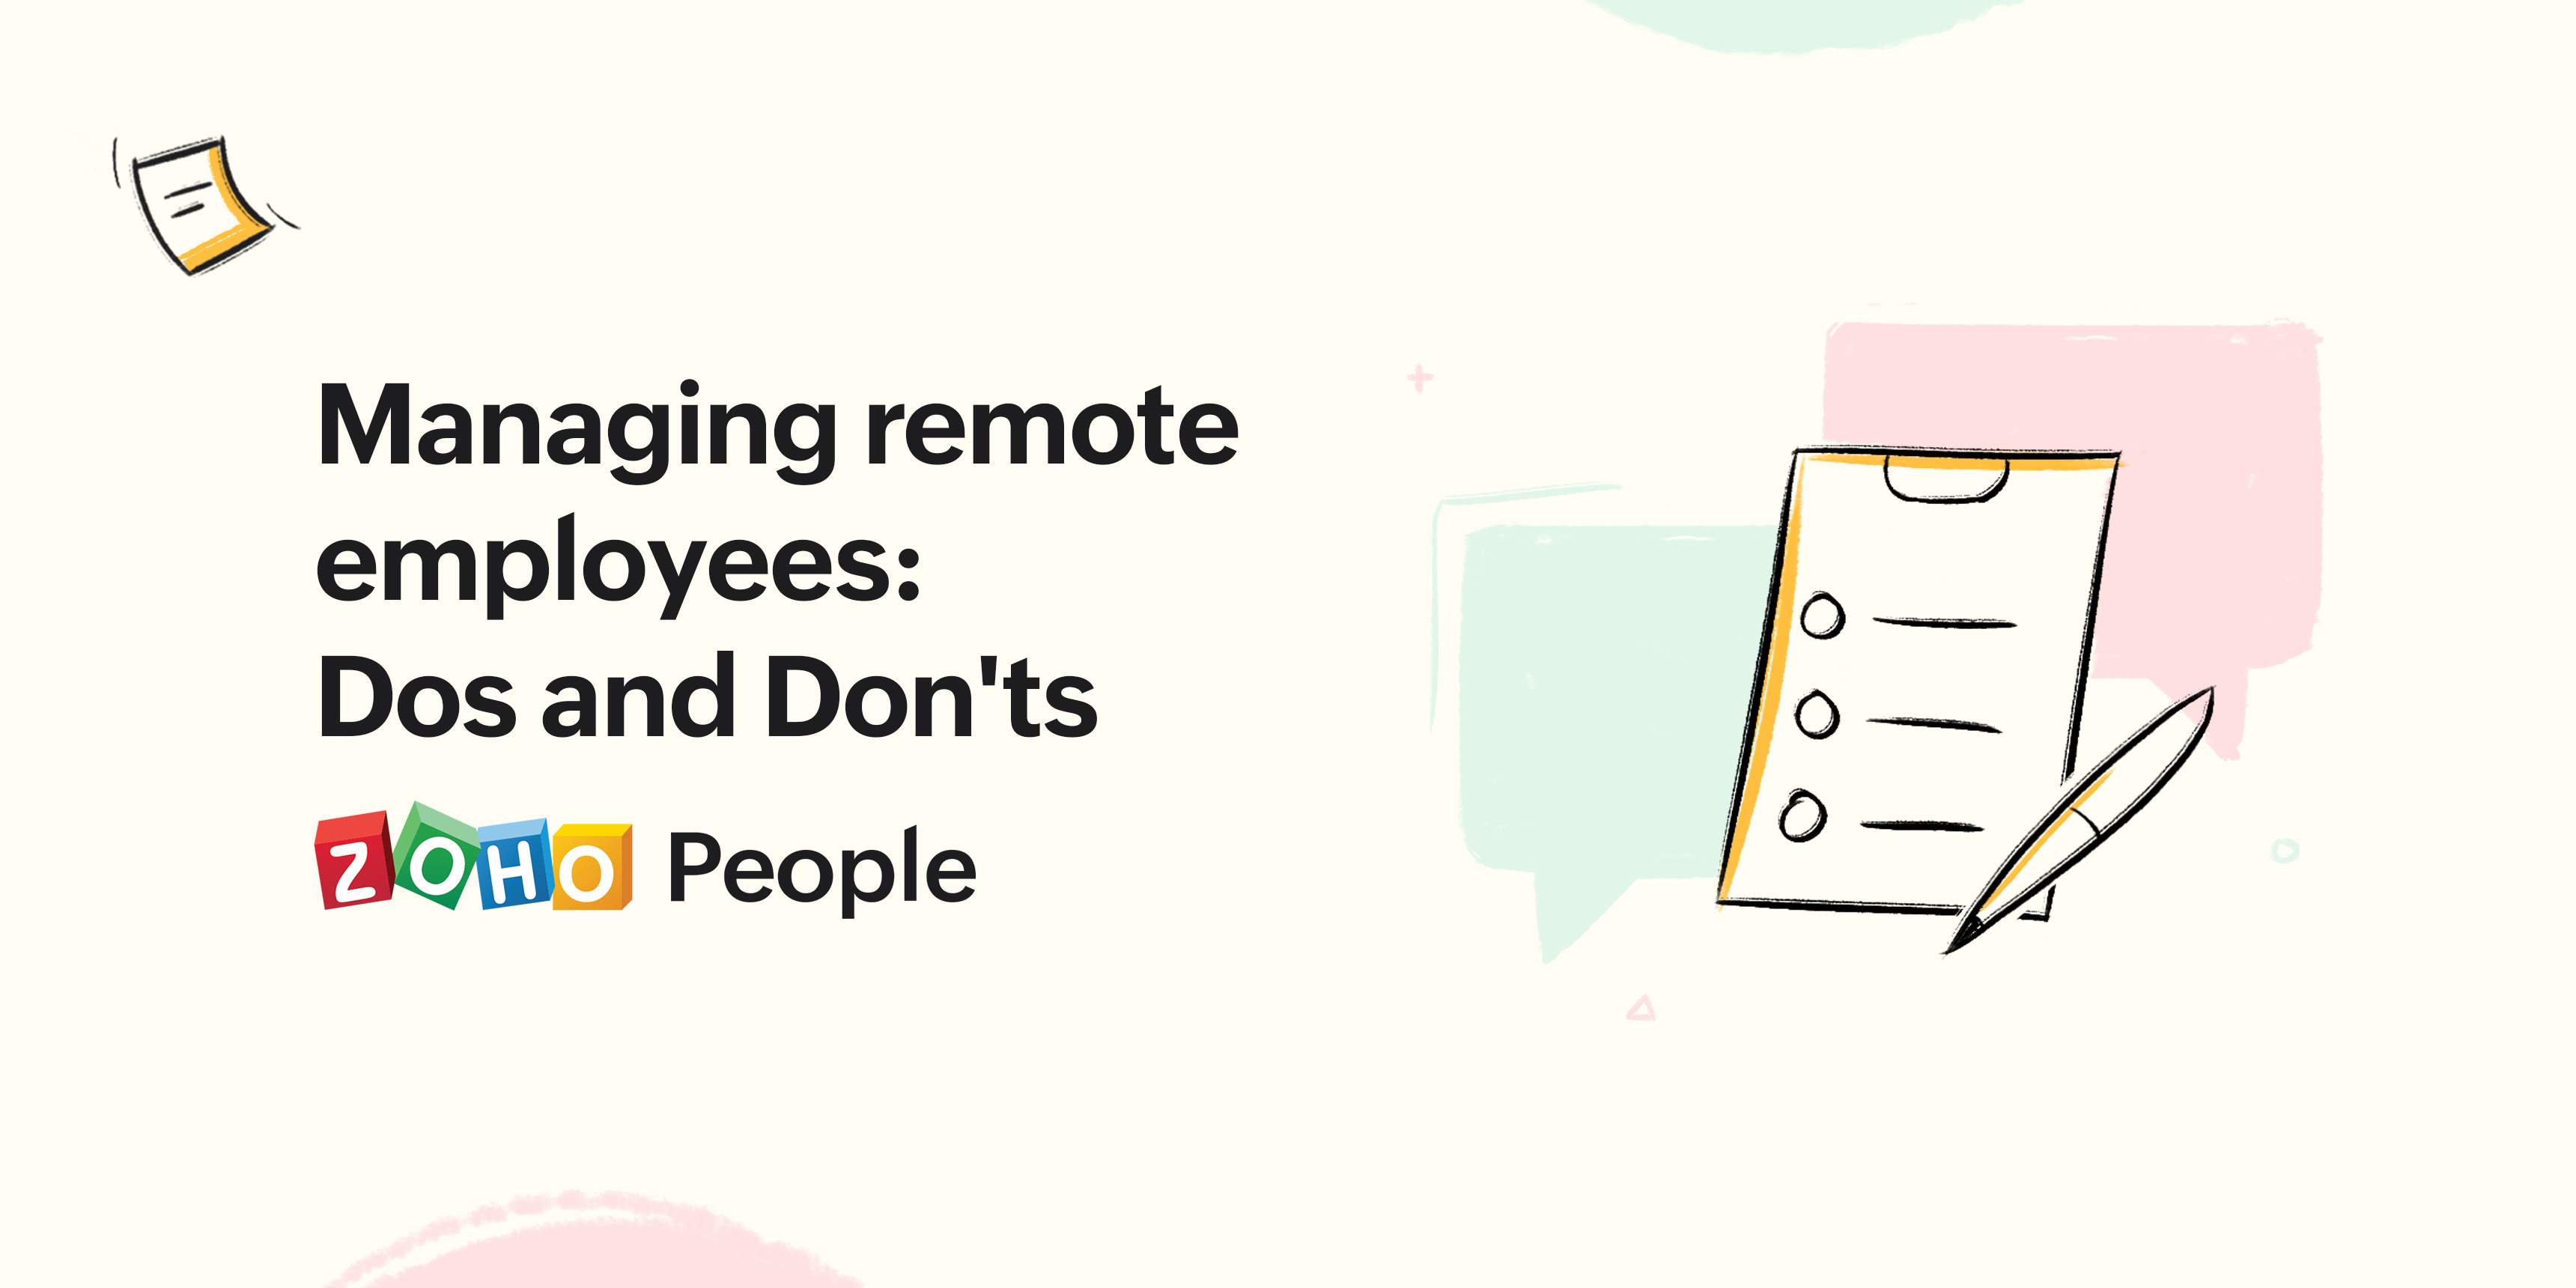 Managing remote employees: Dos and Don'ts